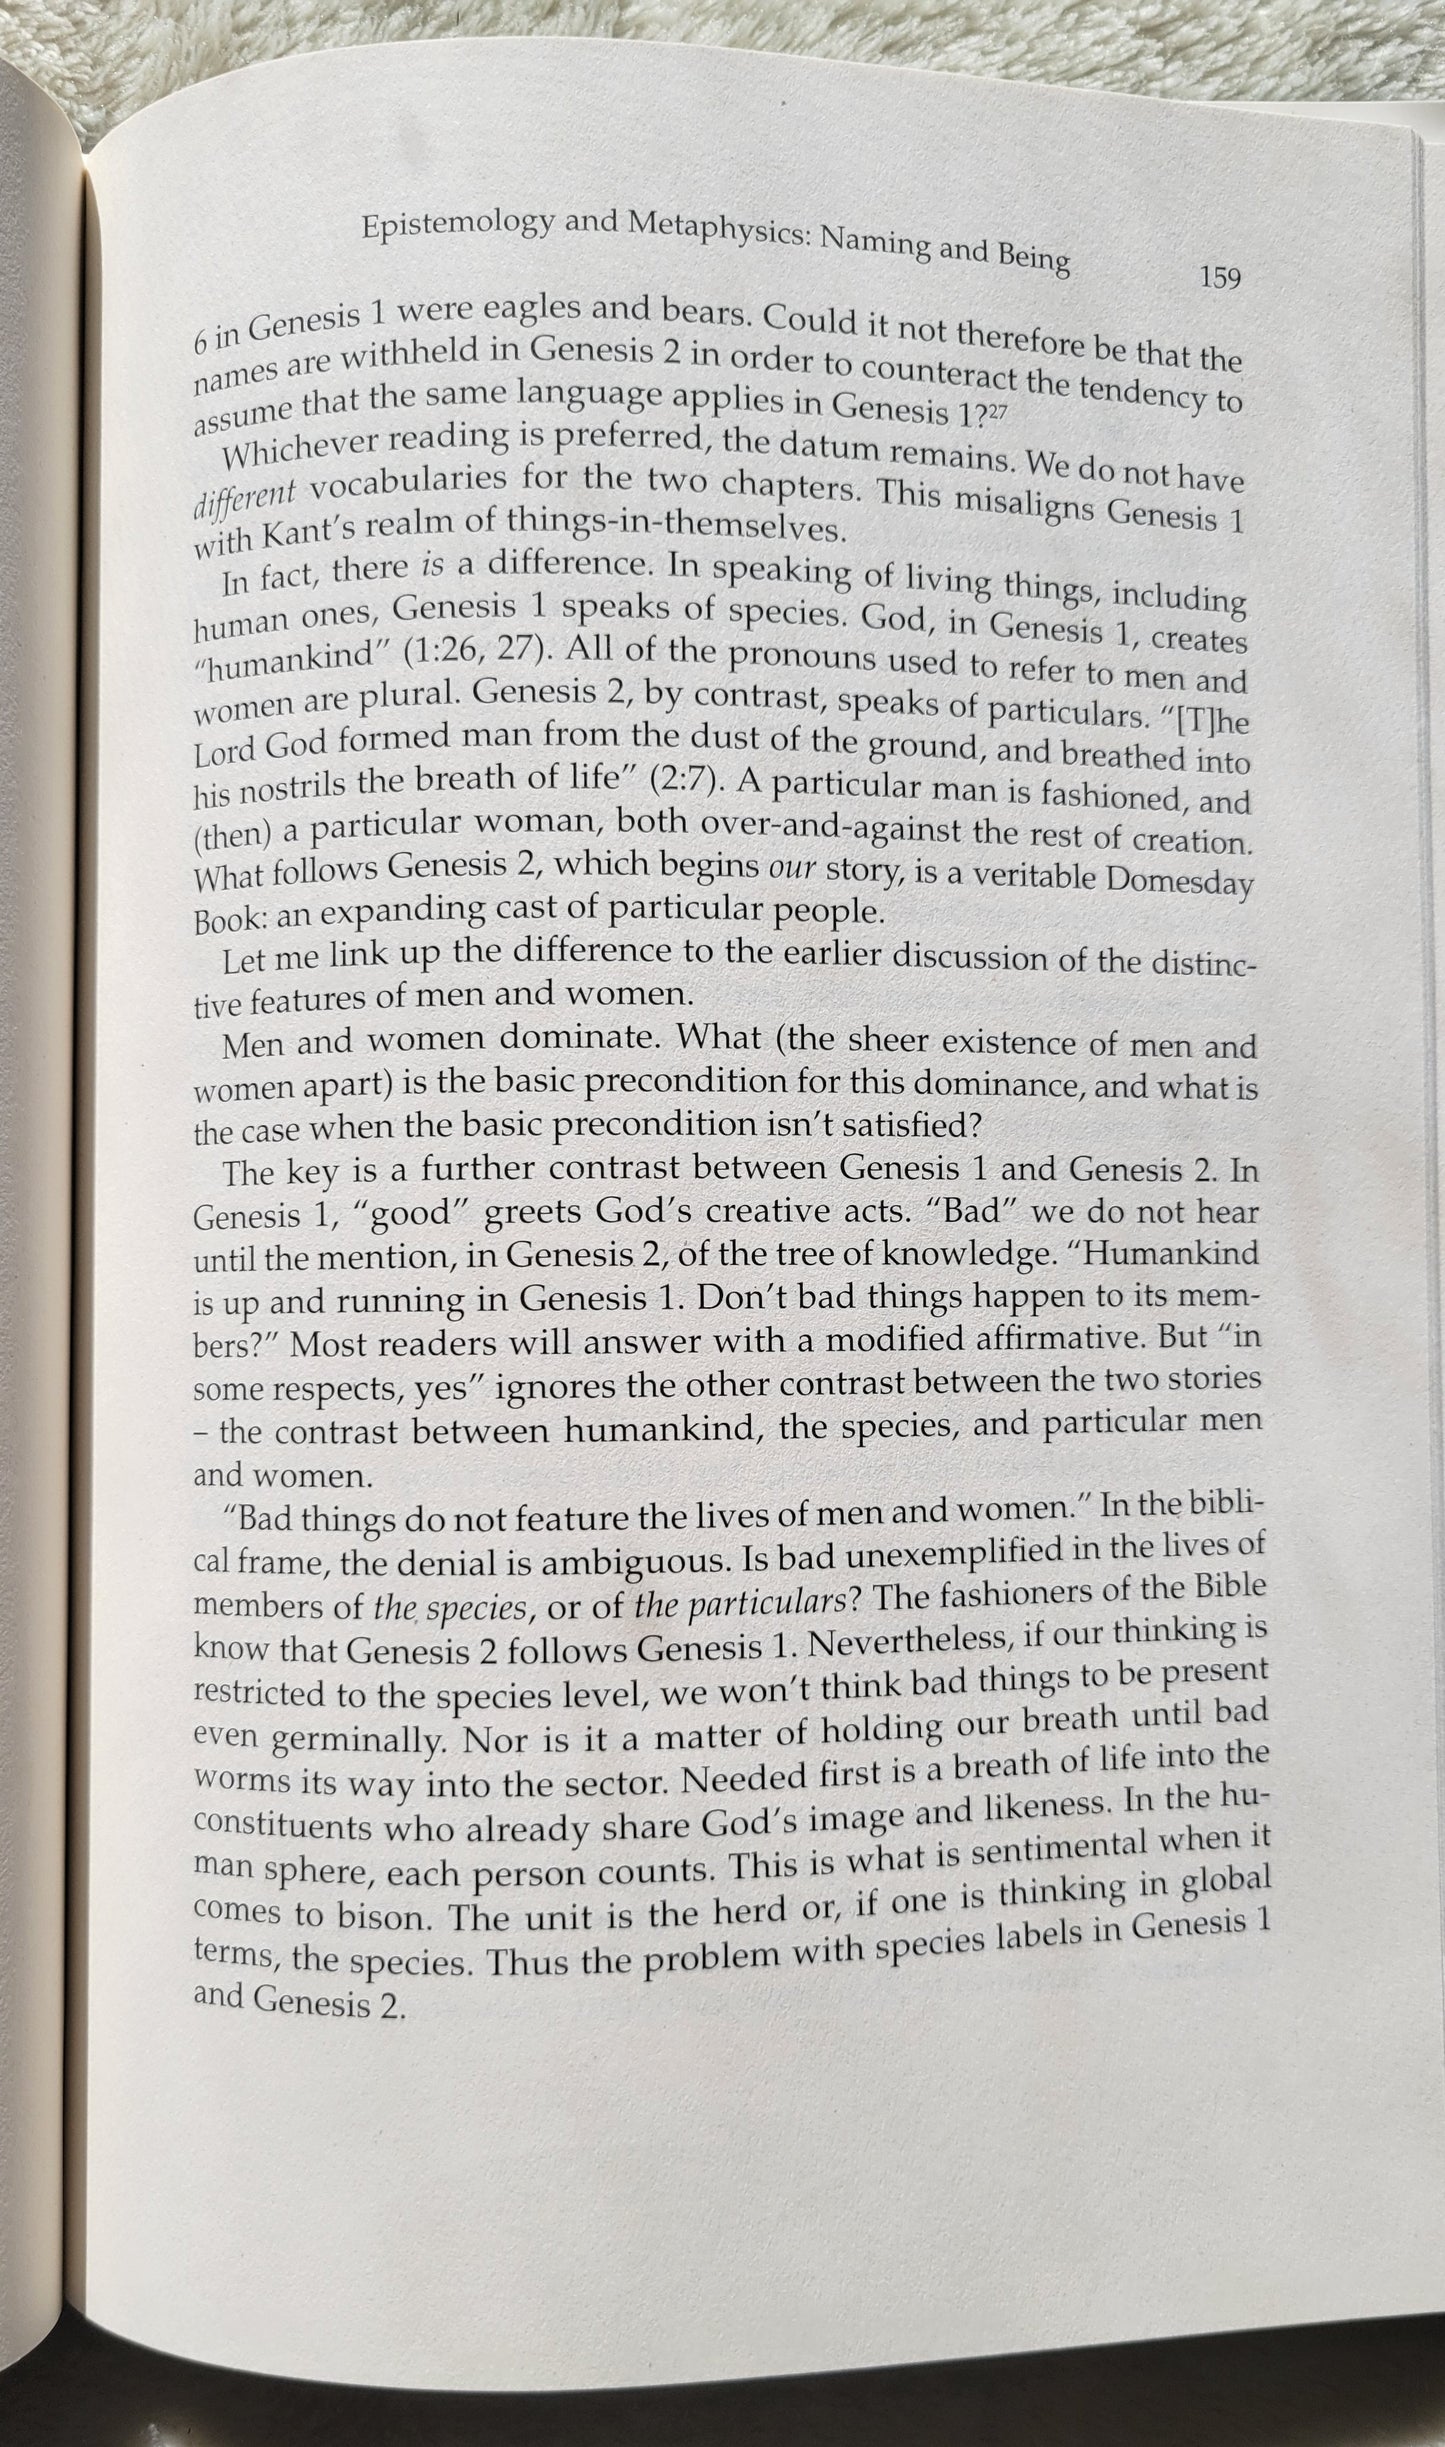 Used book for sale "I Am: Monotheism and the Philosophy of the Bible" by Mark Glouberman, University of Toronto Press, 2019. View of page 159.